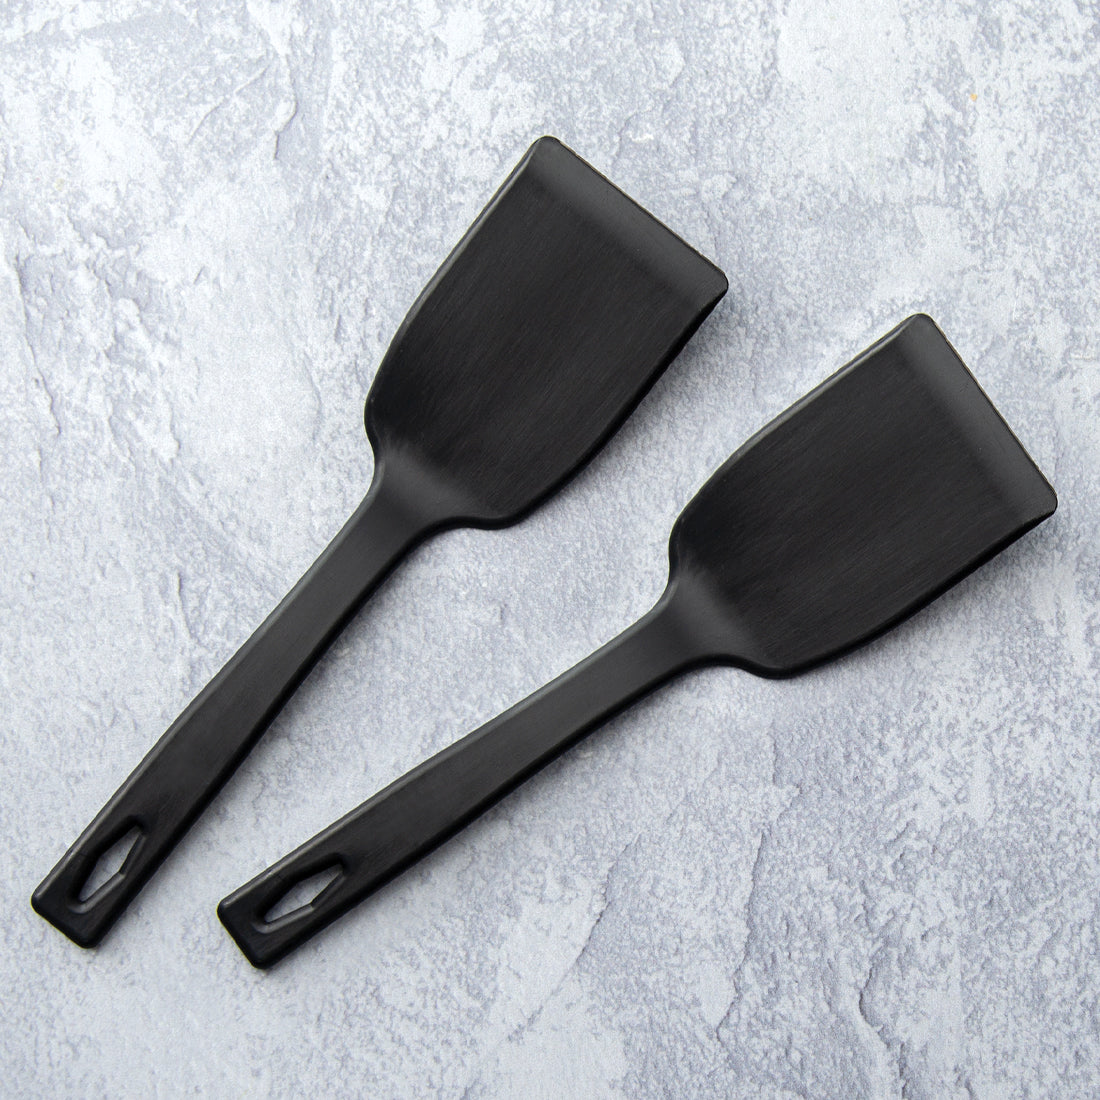 Package of 3 the Best Spatulas Ever FAST SHIPPING Slim Spatulas